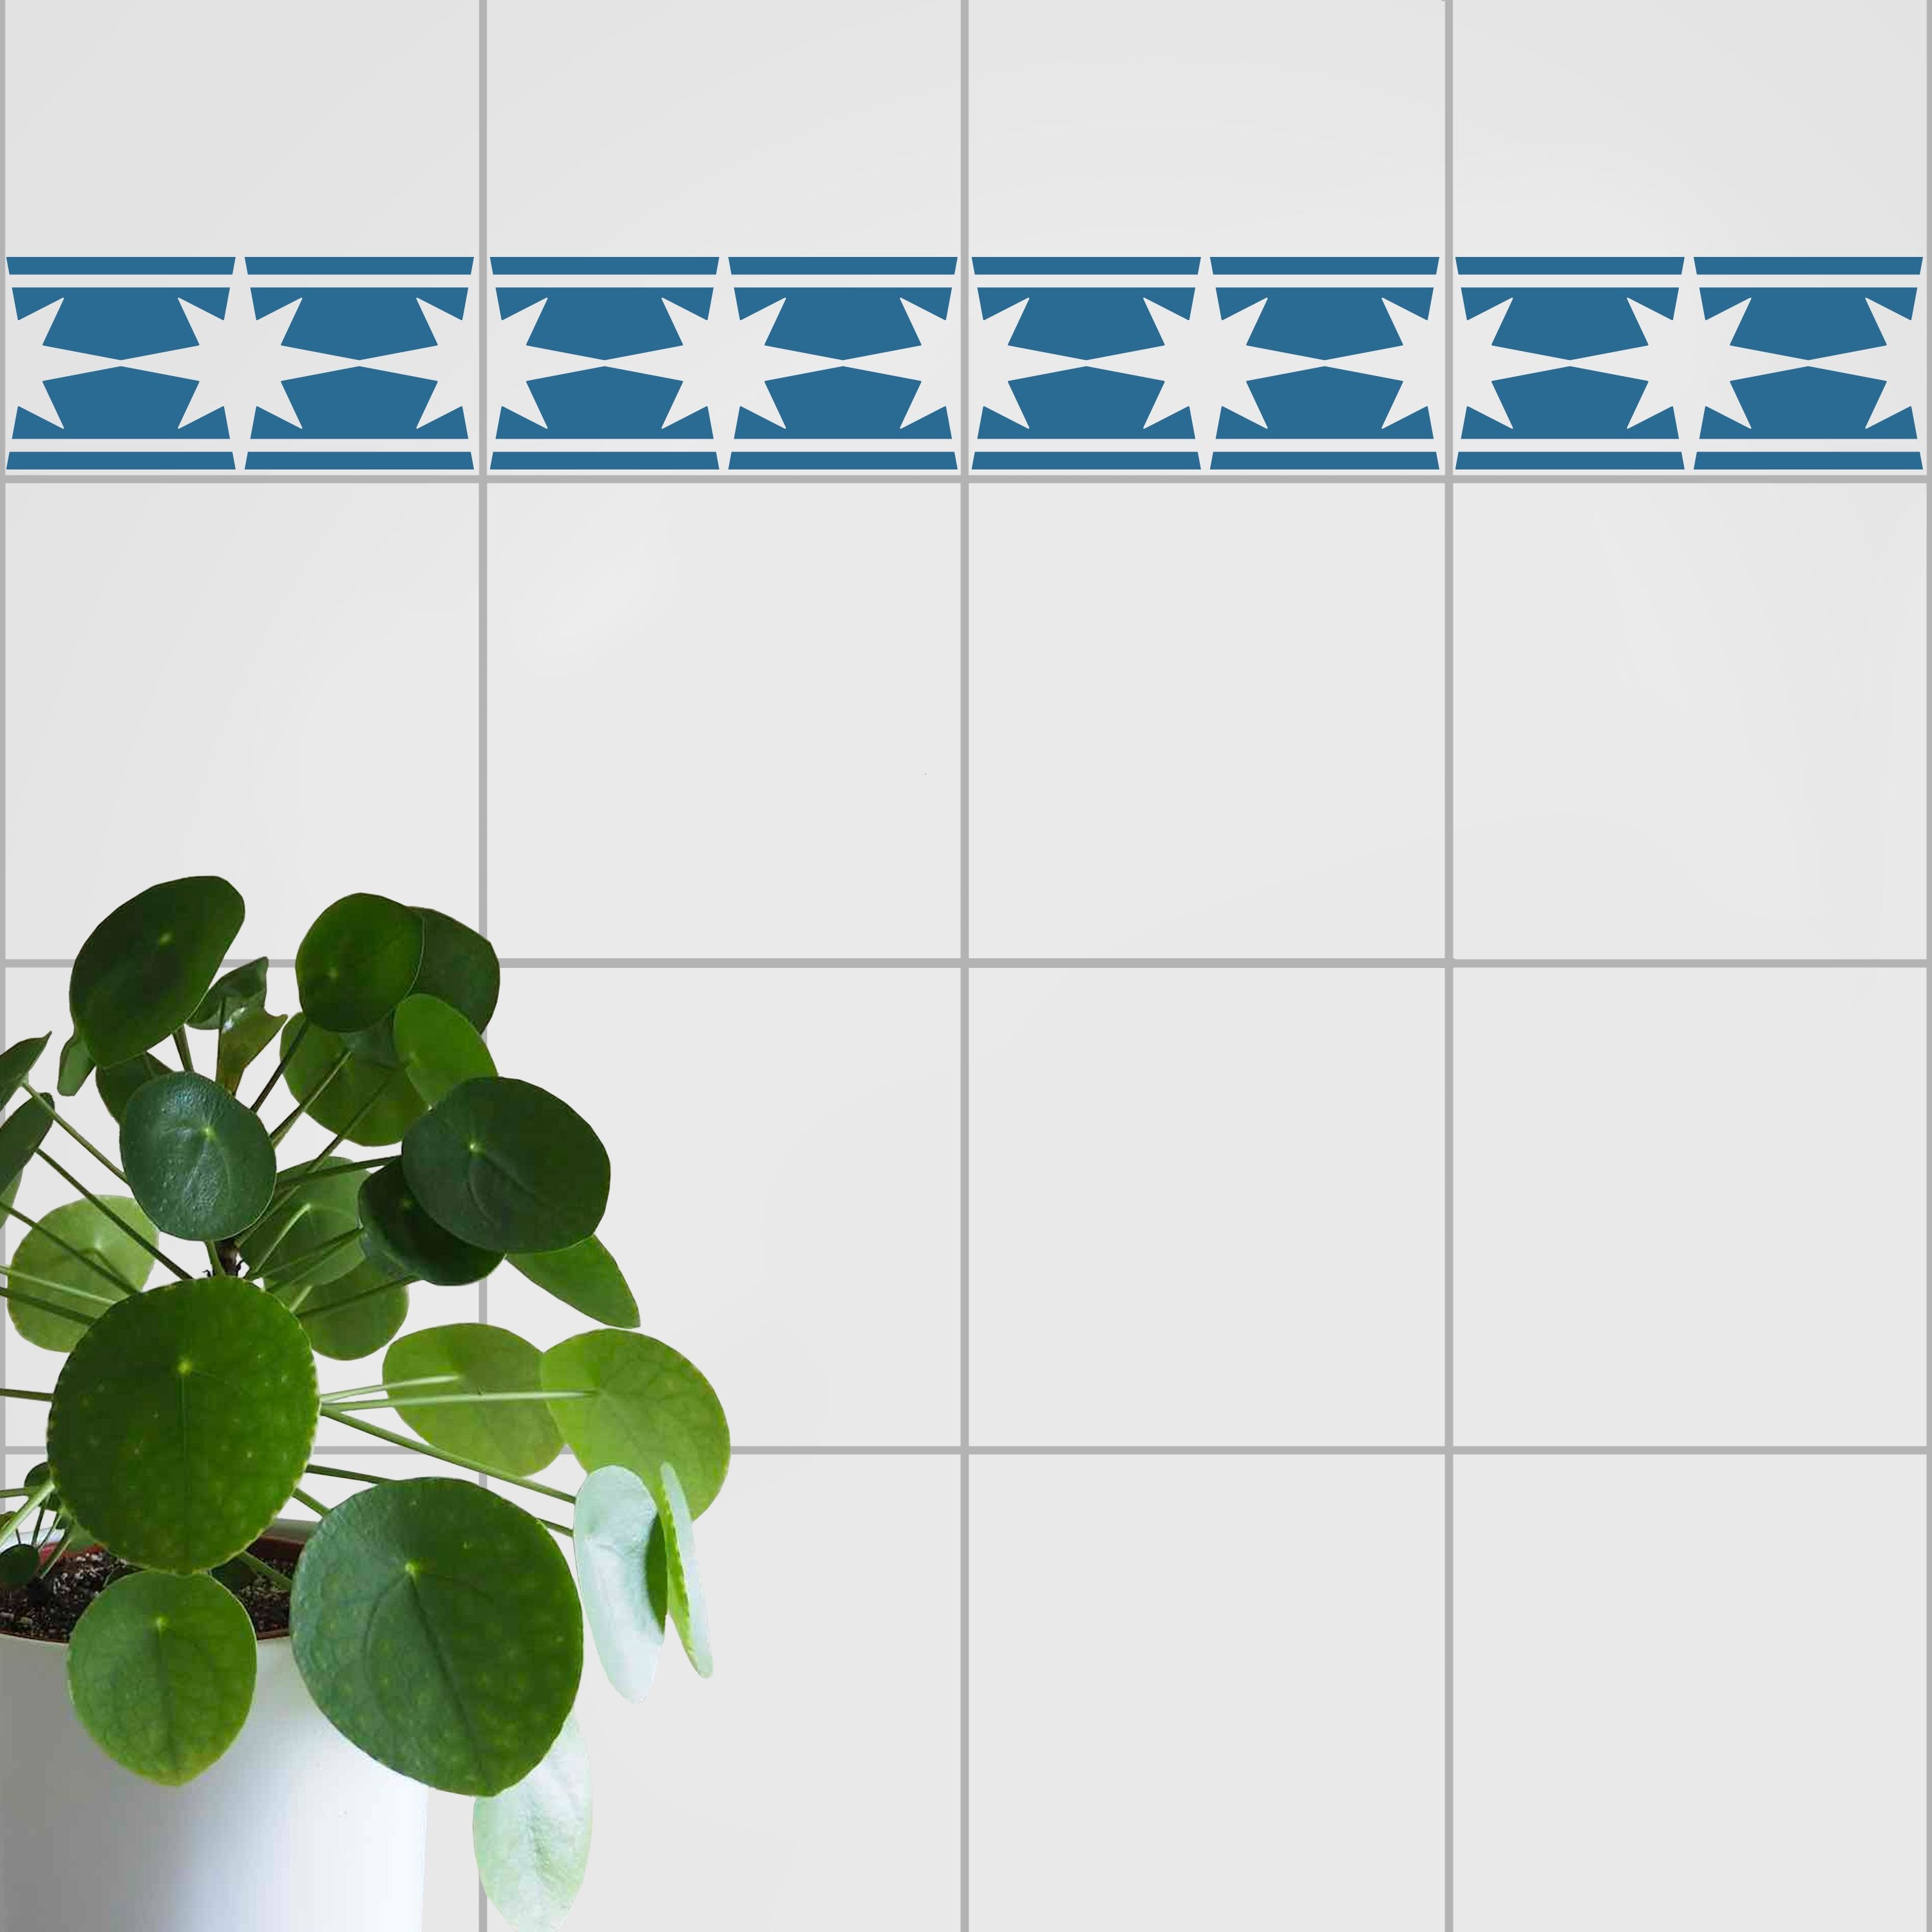 Stow Star Tile Border Stencil - Refurbish old tiles with stencils